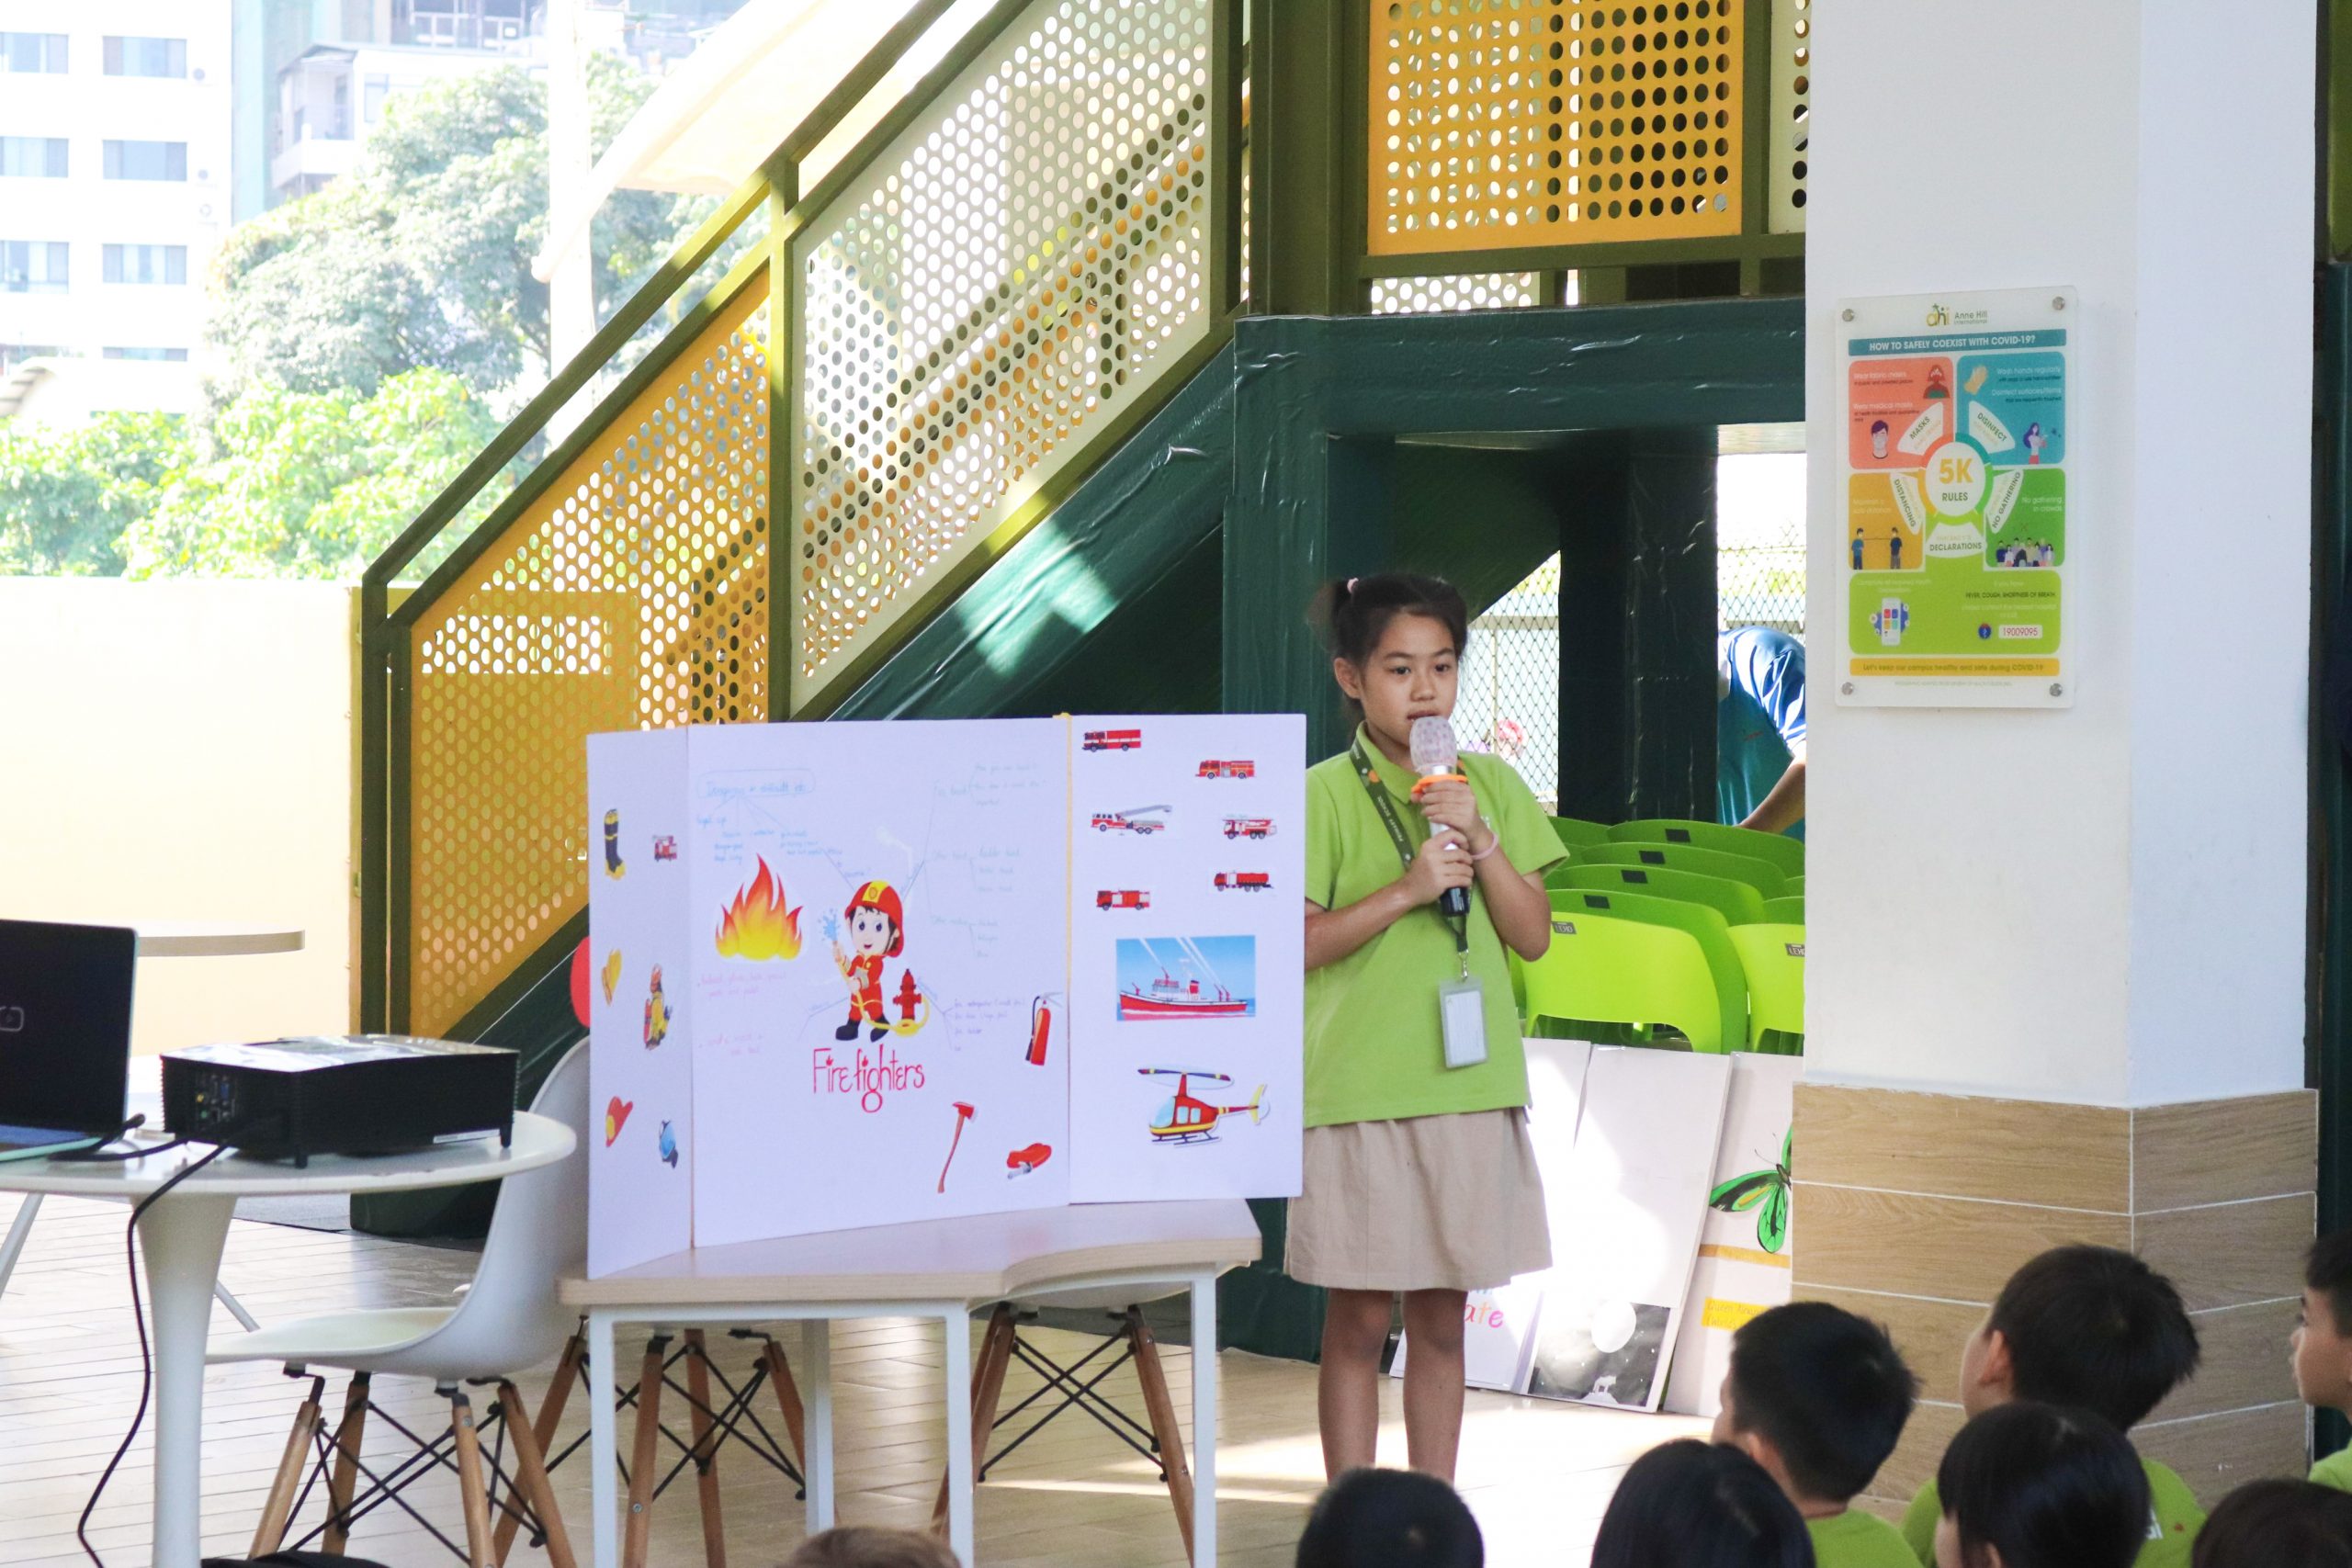 OUR VERY FIRST PUBLIC SPEAKING CONTEST AT OUR PRIMARY SCHOOL!